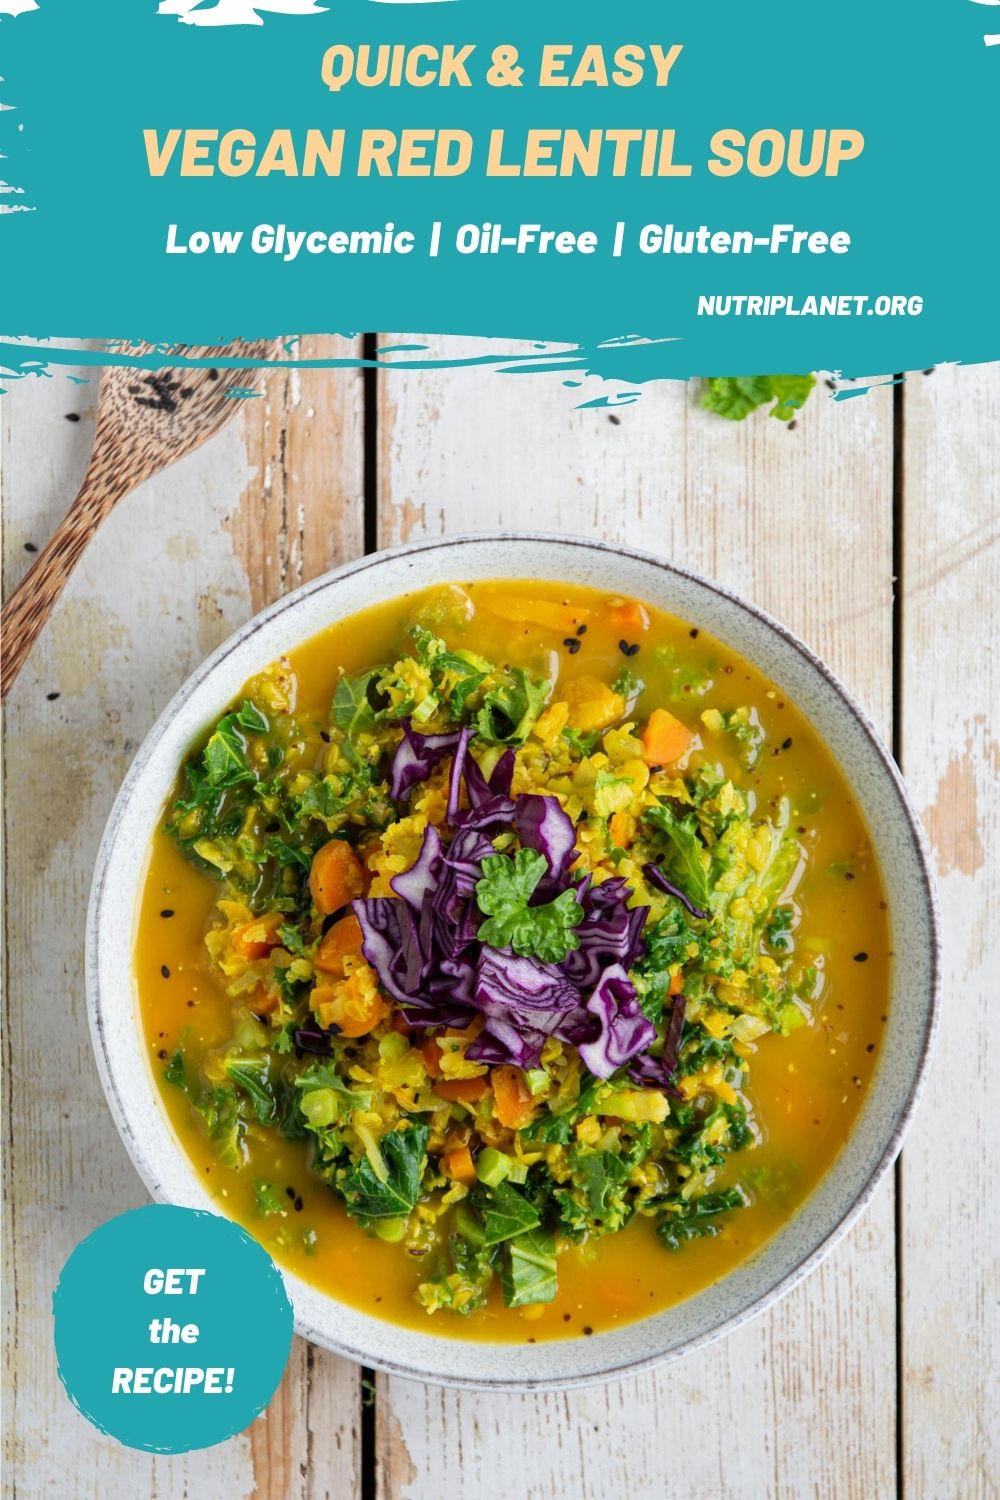 Learn how to make a vegan low glycemic curried red lentil soup with mung beans and kale. It’s a perfectly healthy quick and easy single serving meal to prepare for lunch. 